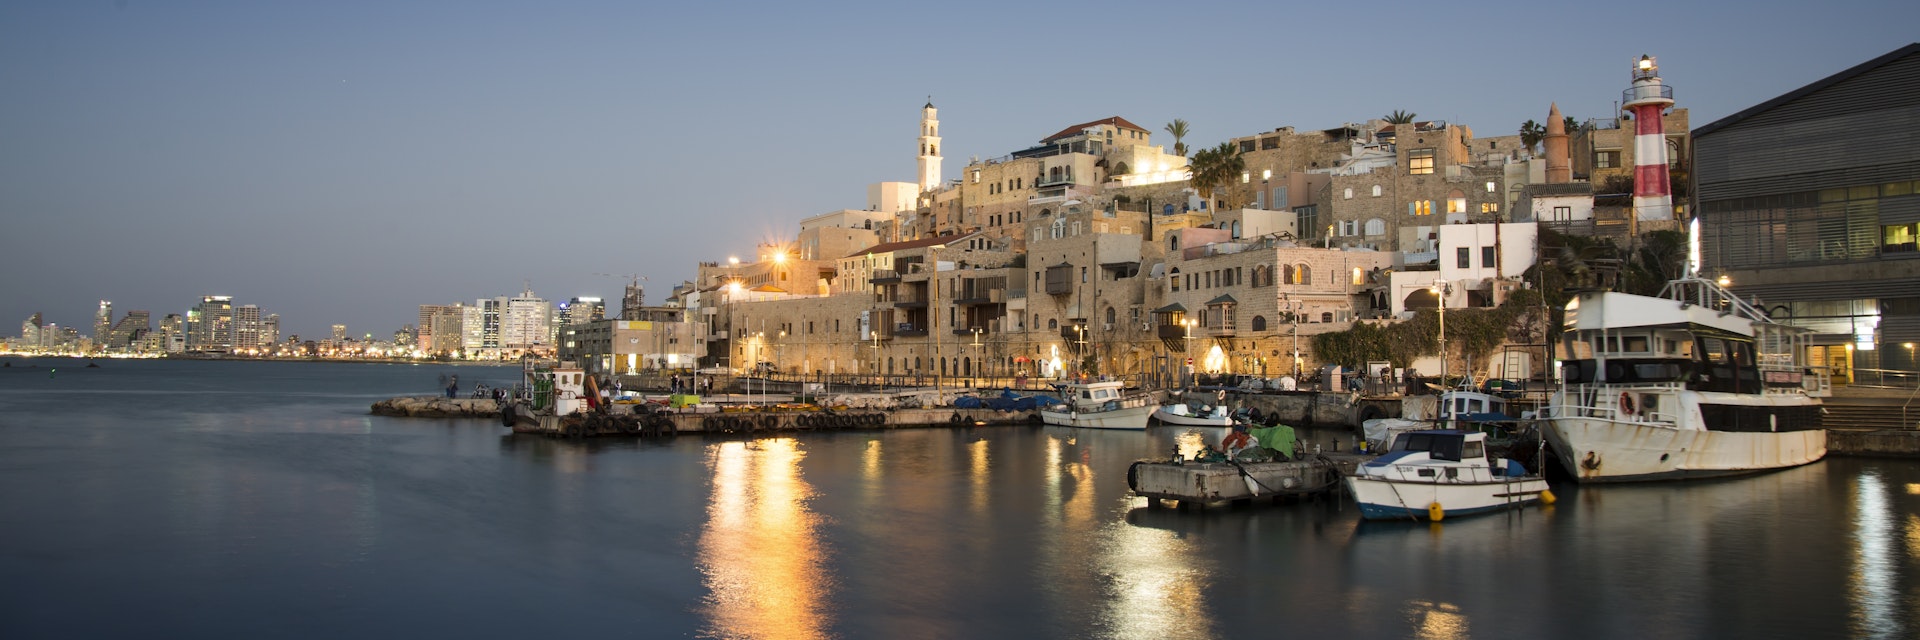 Waterfront at Old City of Jaffa in Tel Aviv.